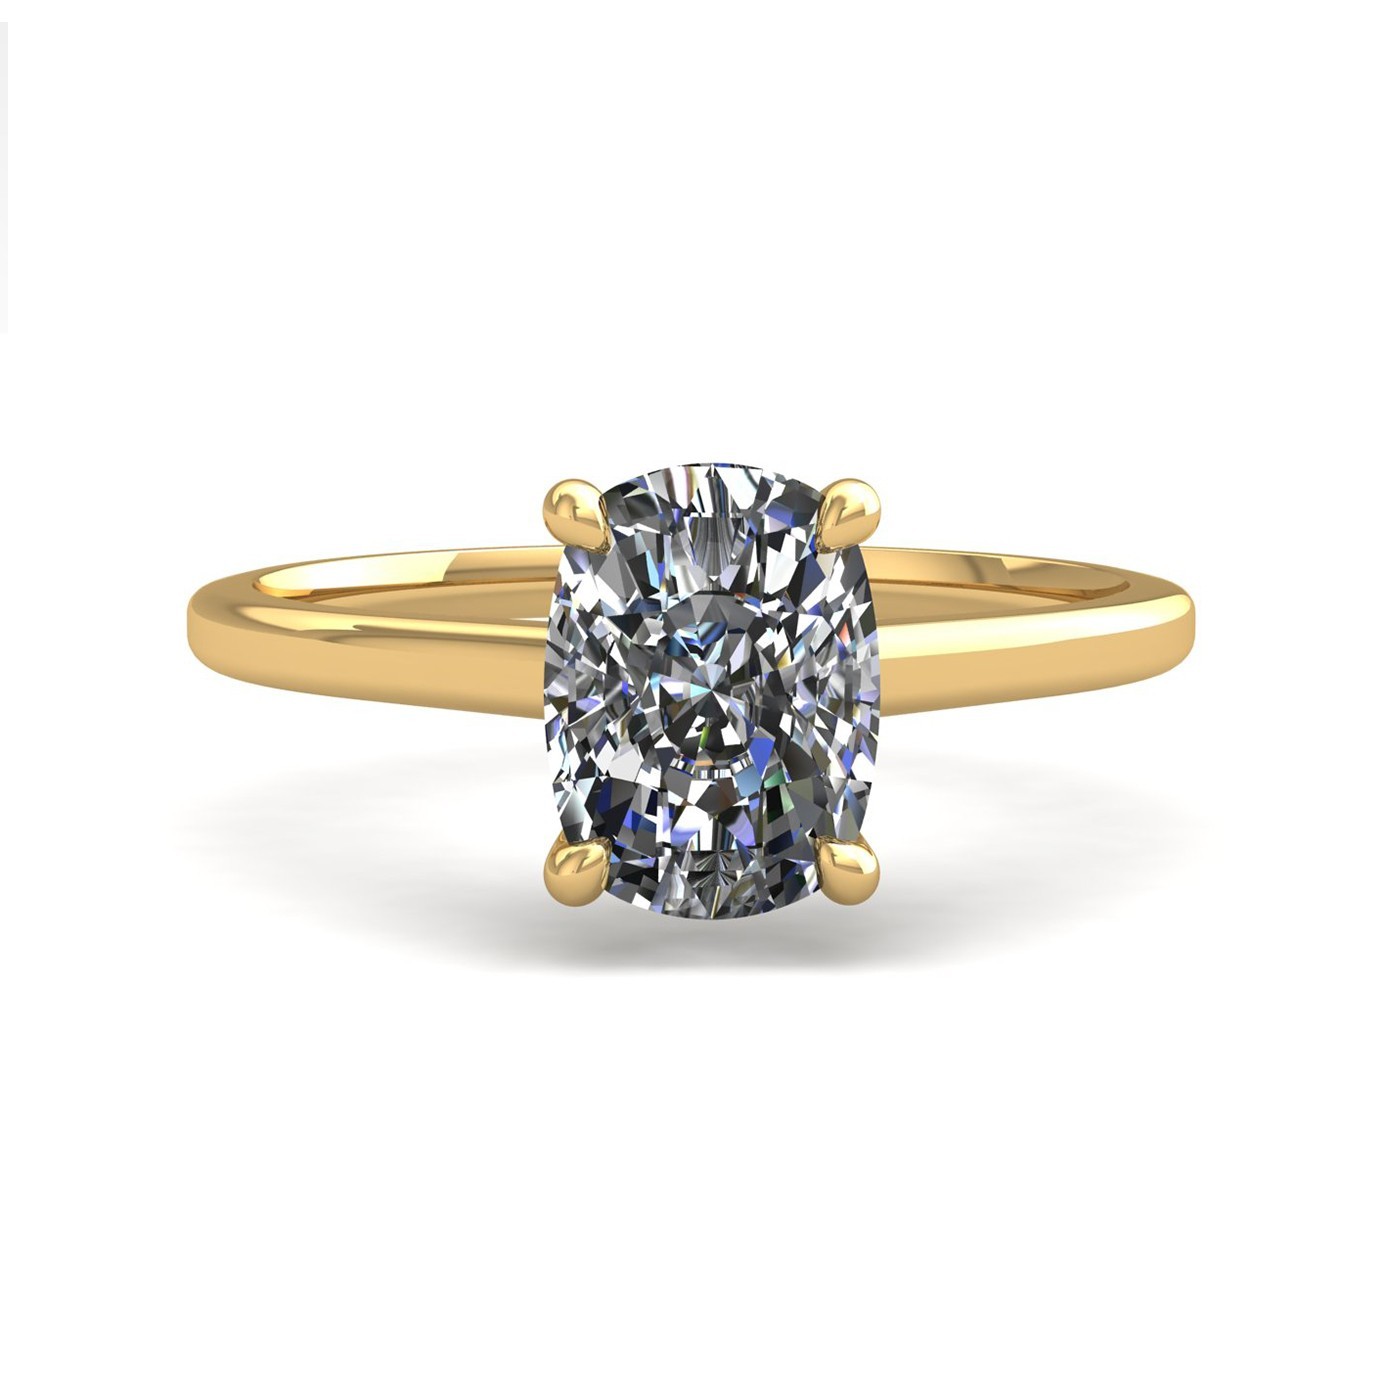 18k yellow gold  0,80 ct 4 prongs solitaire elongated cushion cut diamond engagement ring with whisper thin band Photos & images